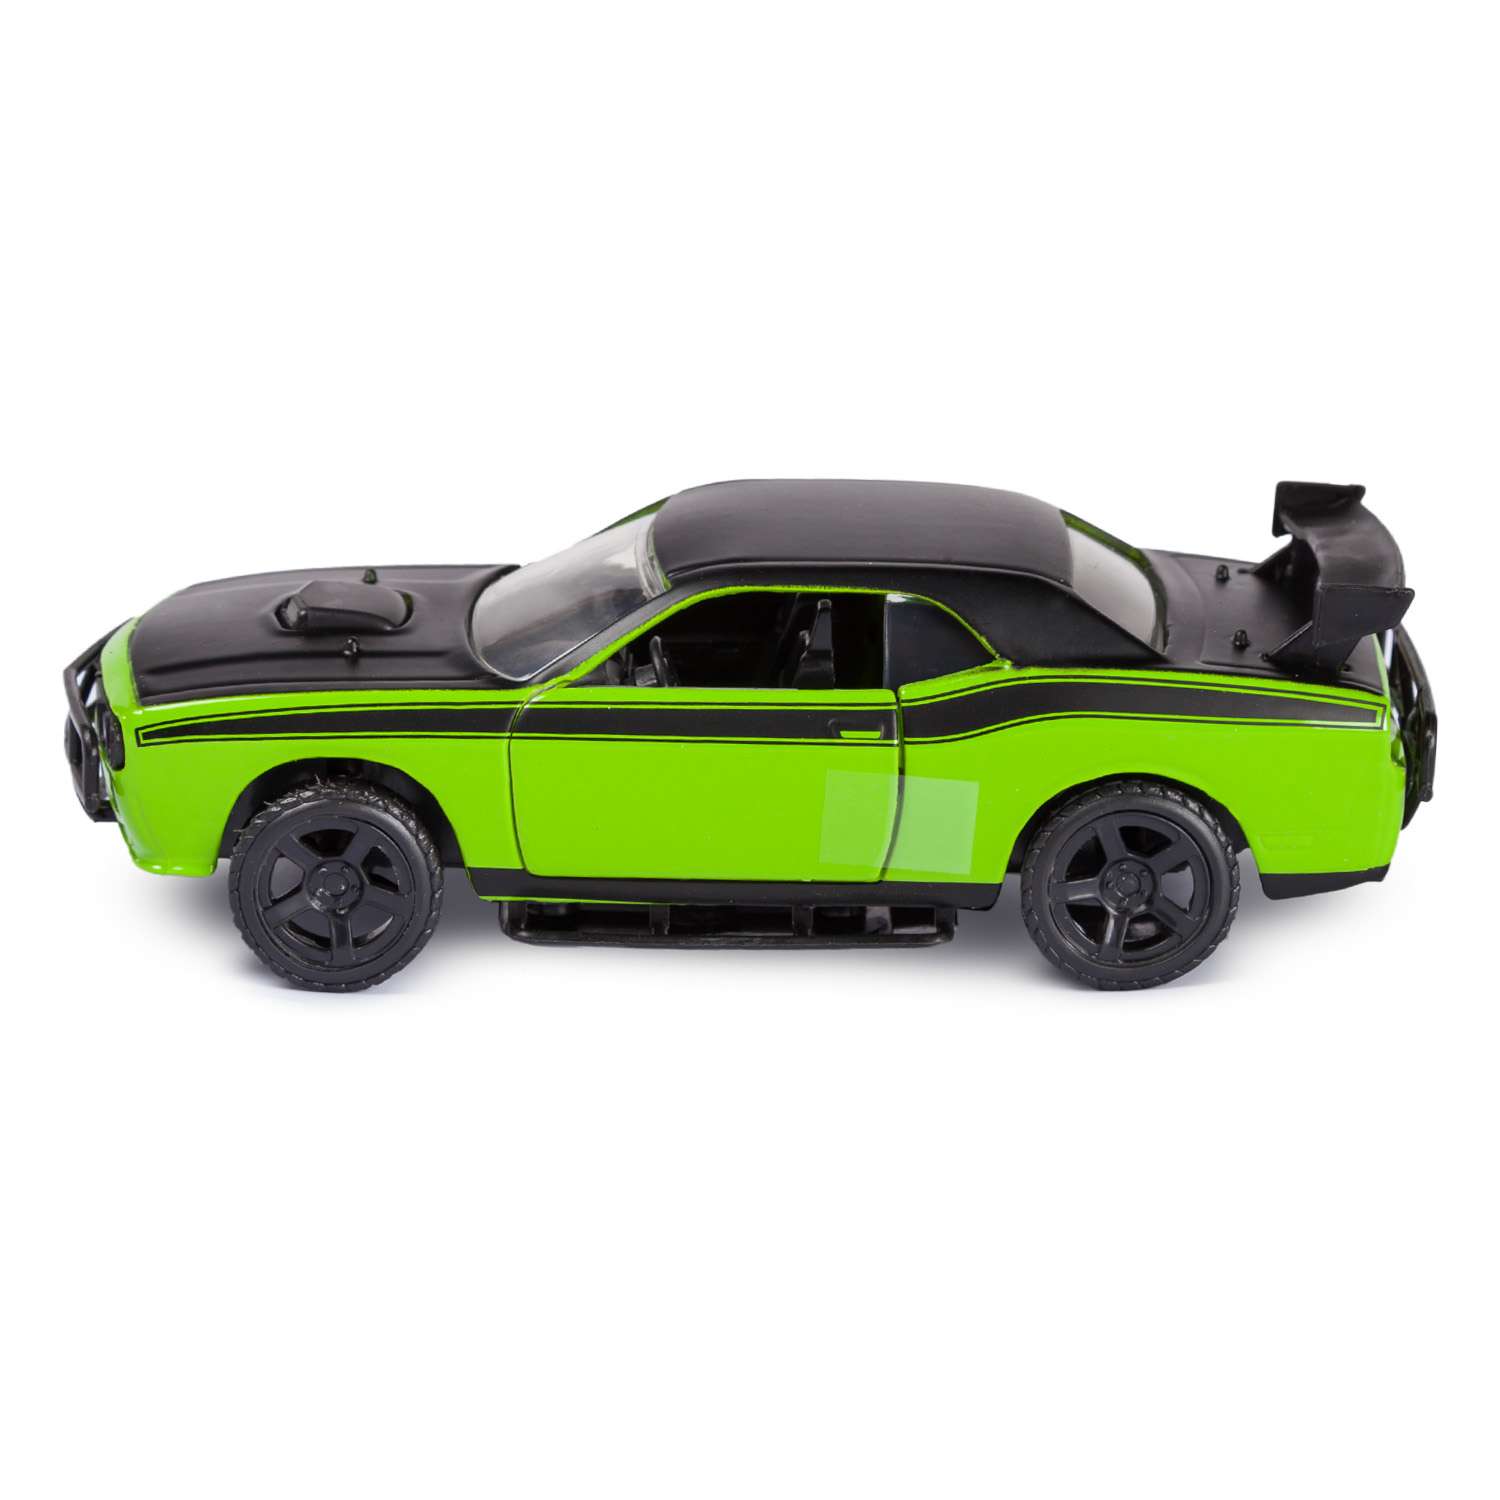 Машинка Fast and Furious Die-cast Challenger SRT8 Off-Road 1:32 металл 24037 - фото 2